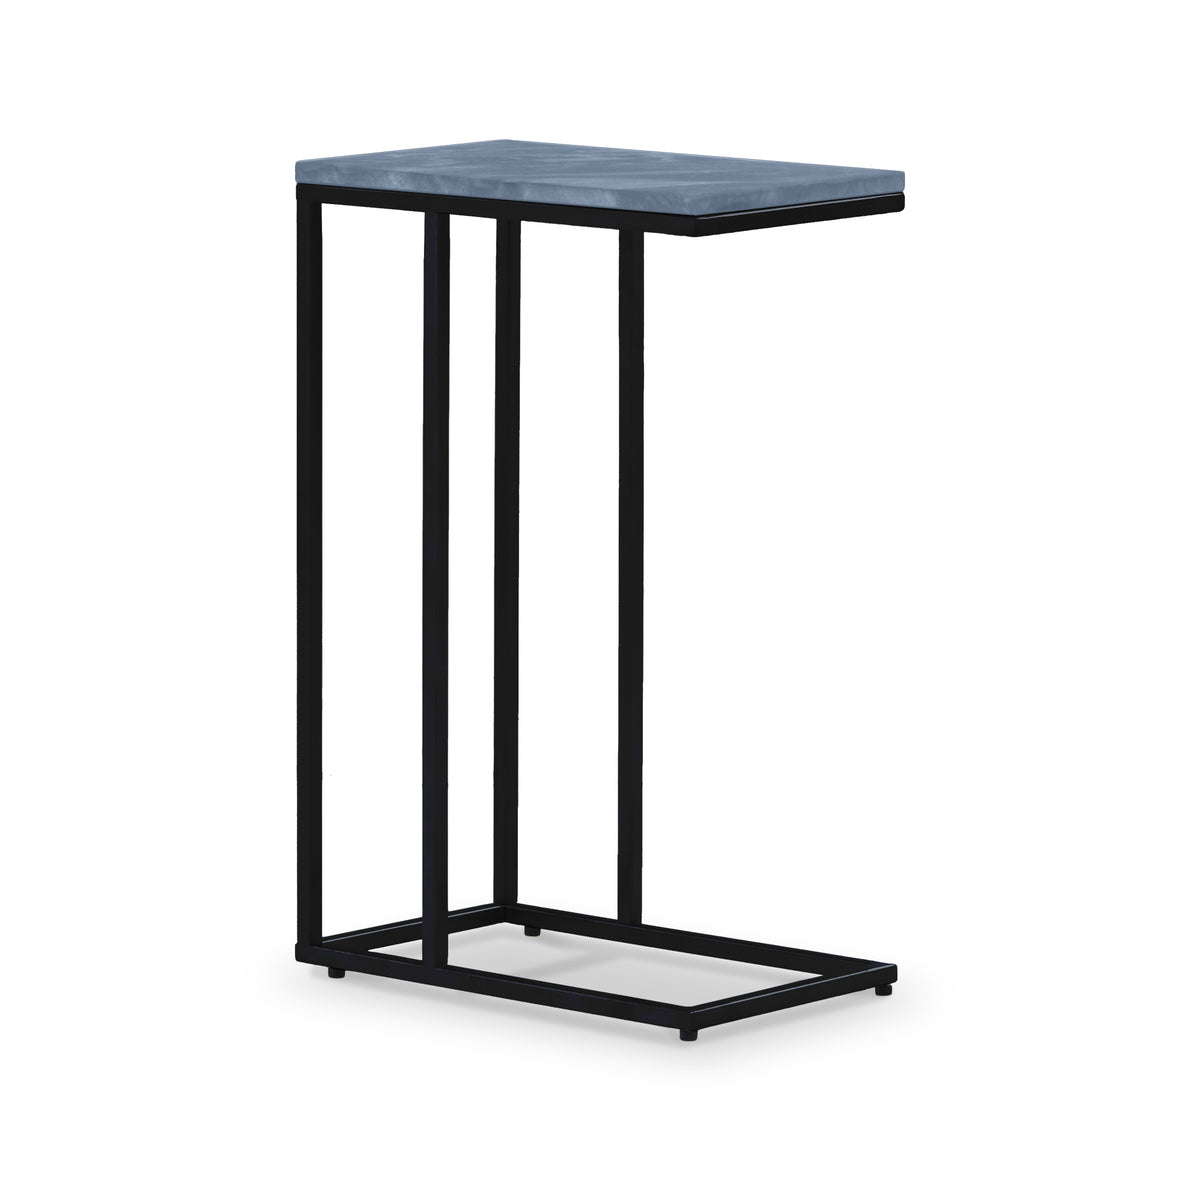 Elissa Grey Blue Marble Side Table with Black Leg from Roseland Furniture